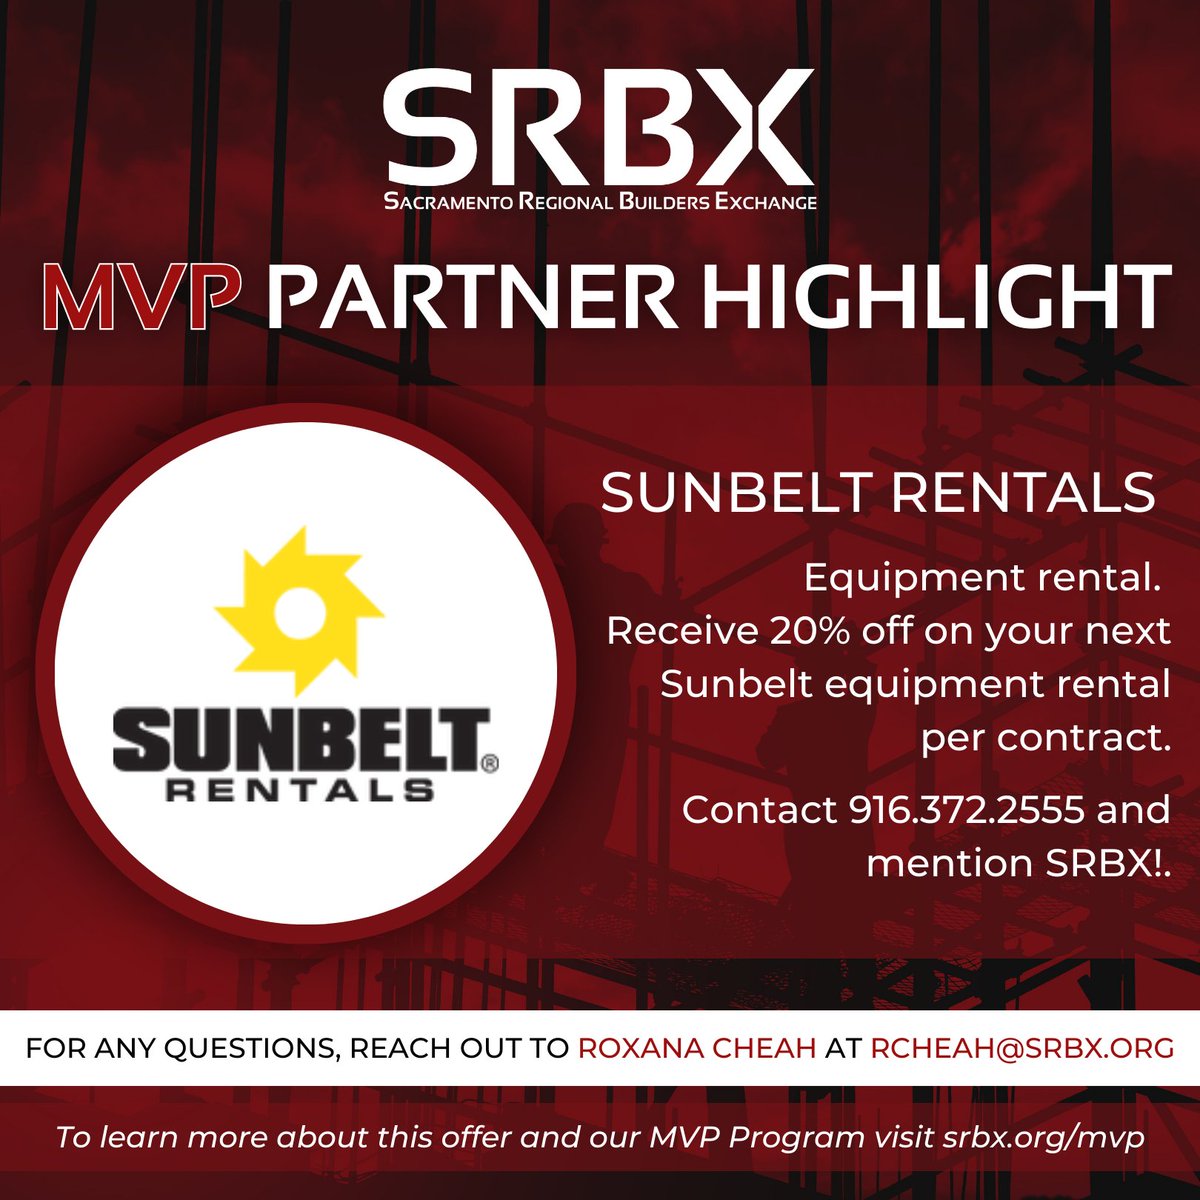 MVP Highlight of the Week: @SunbeltRentals! Looking to elevate your construction game? Look no further!  Receive a whopping 20% off on your next Sunbelt equipment rental per contract.  Don't miss this exclusive offer! Contact them at 916.372.2555. #EquipmentRental #SRBX